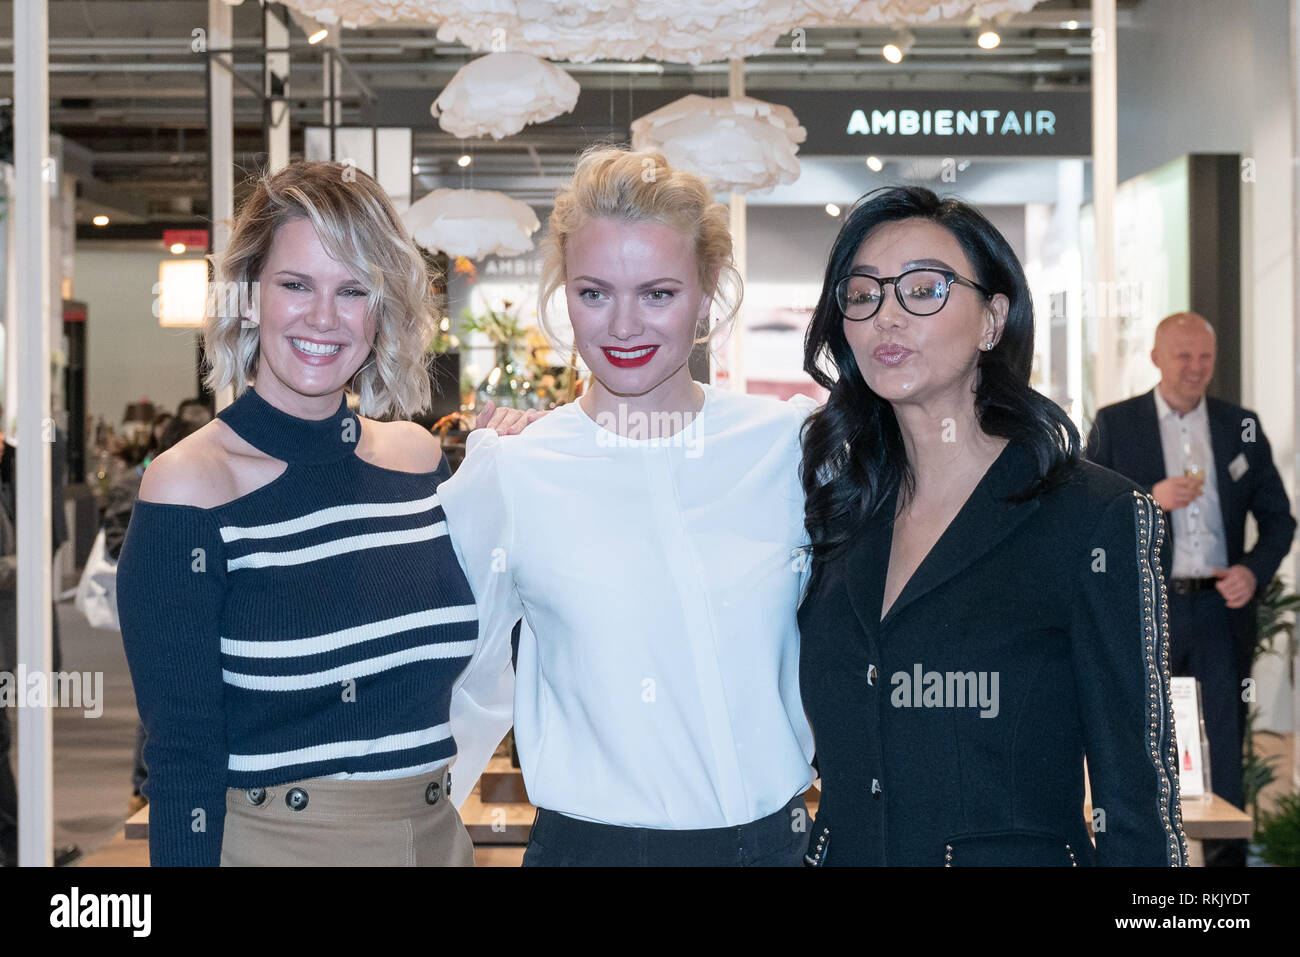 Frankfurt, Germany. 11th Feb 2019. Monica Ivancan, Franziska Knuppe and Verona Pooth visit Ipuro at Ambiente trade fair 2019. Ambiente is a leading consumer goods trade fair with more than 4300 exhibitors and 130,000+ trade visitors. Credit: Markus Wissmann/Alamy Live News Stock Photo